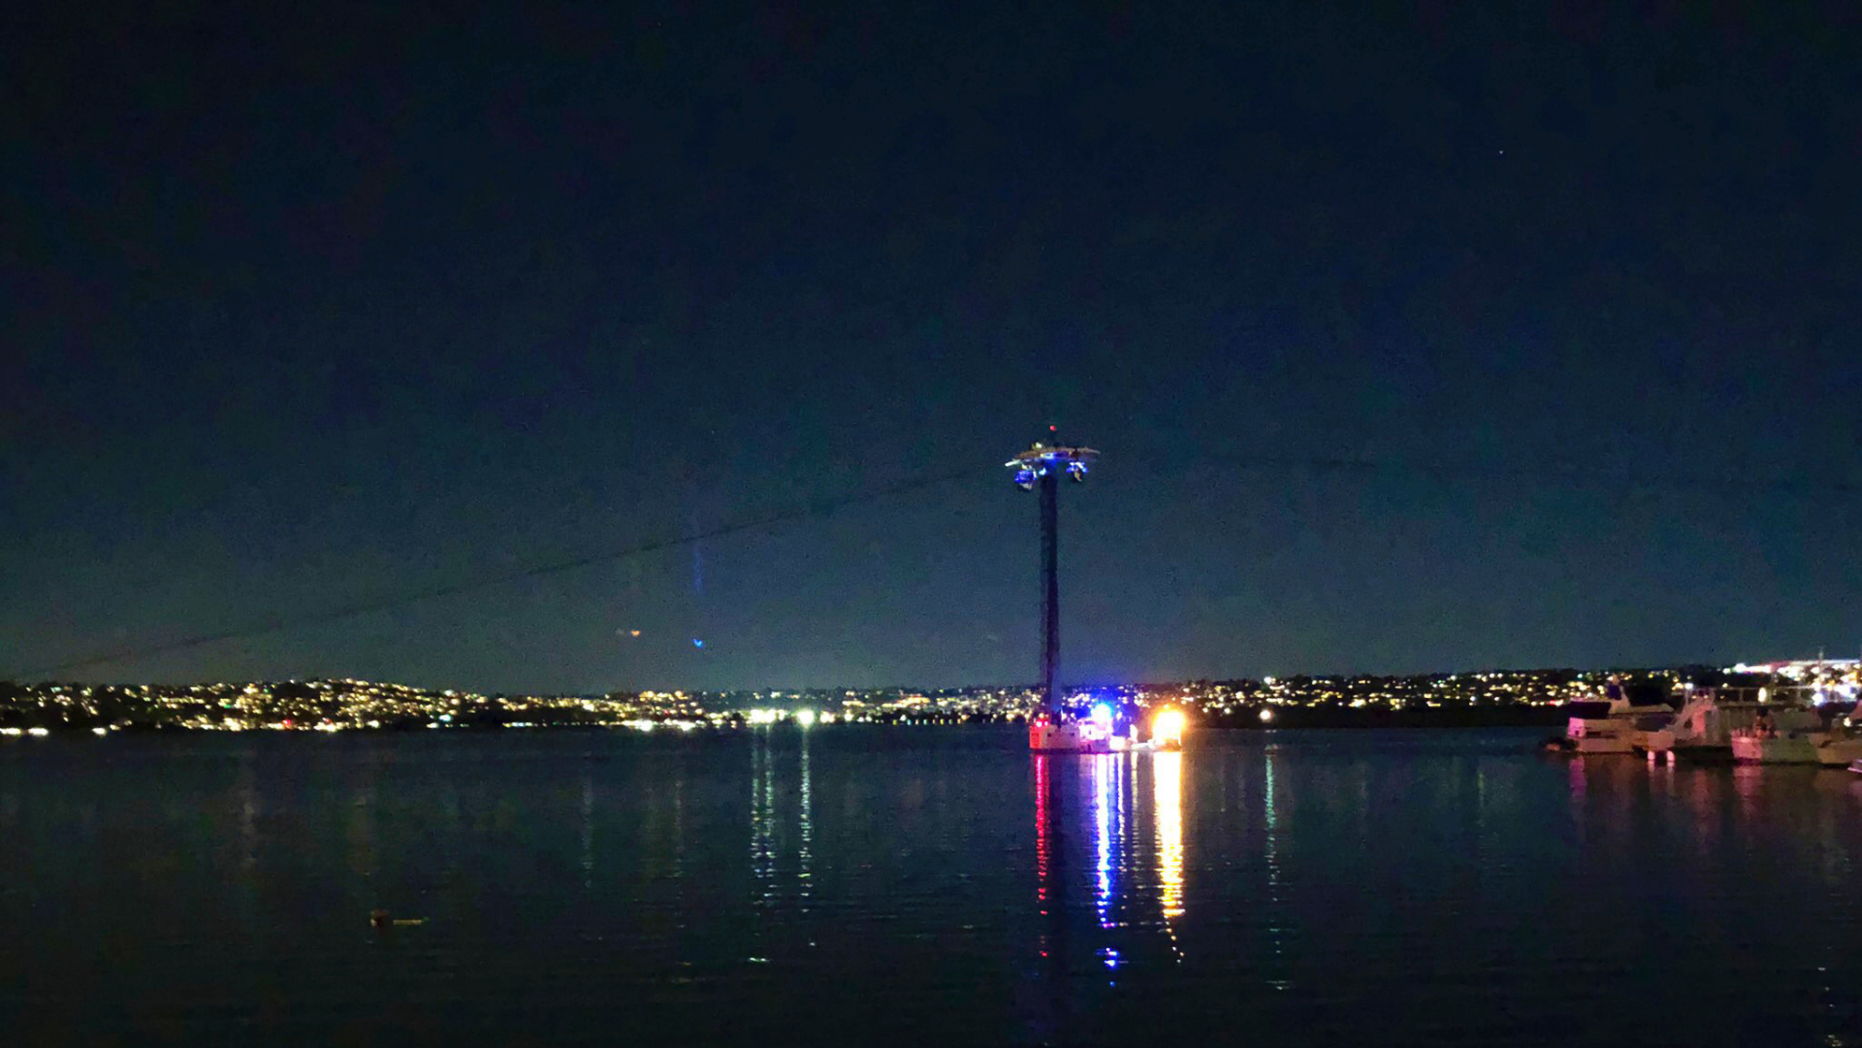 On this photo provided by Kasia Gregorczyk, more than a dozen people are stuck in a stroll at SeaWorld on Monday, February 18, 2019 in San Diego. San Diego police told FOX5 News that nearly six gondolas had stopped working Monday night after a breaker tripped 